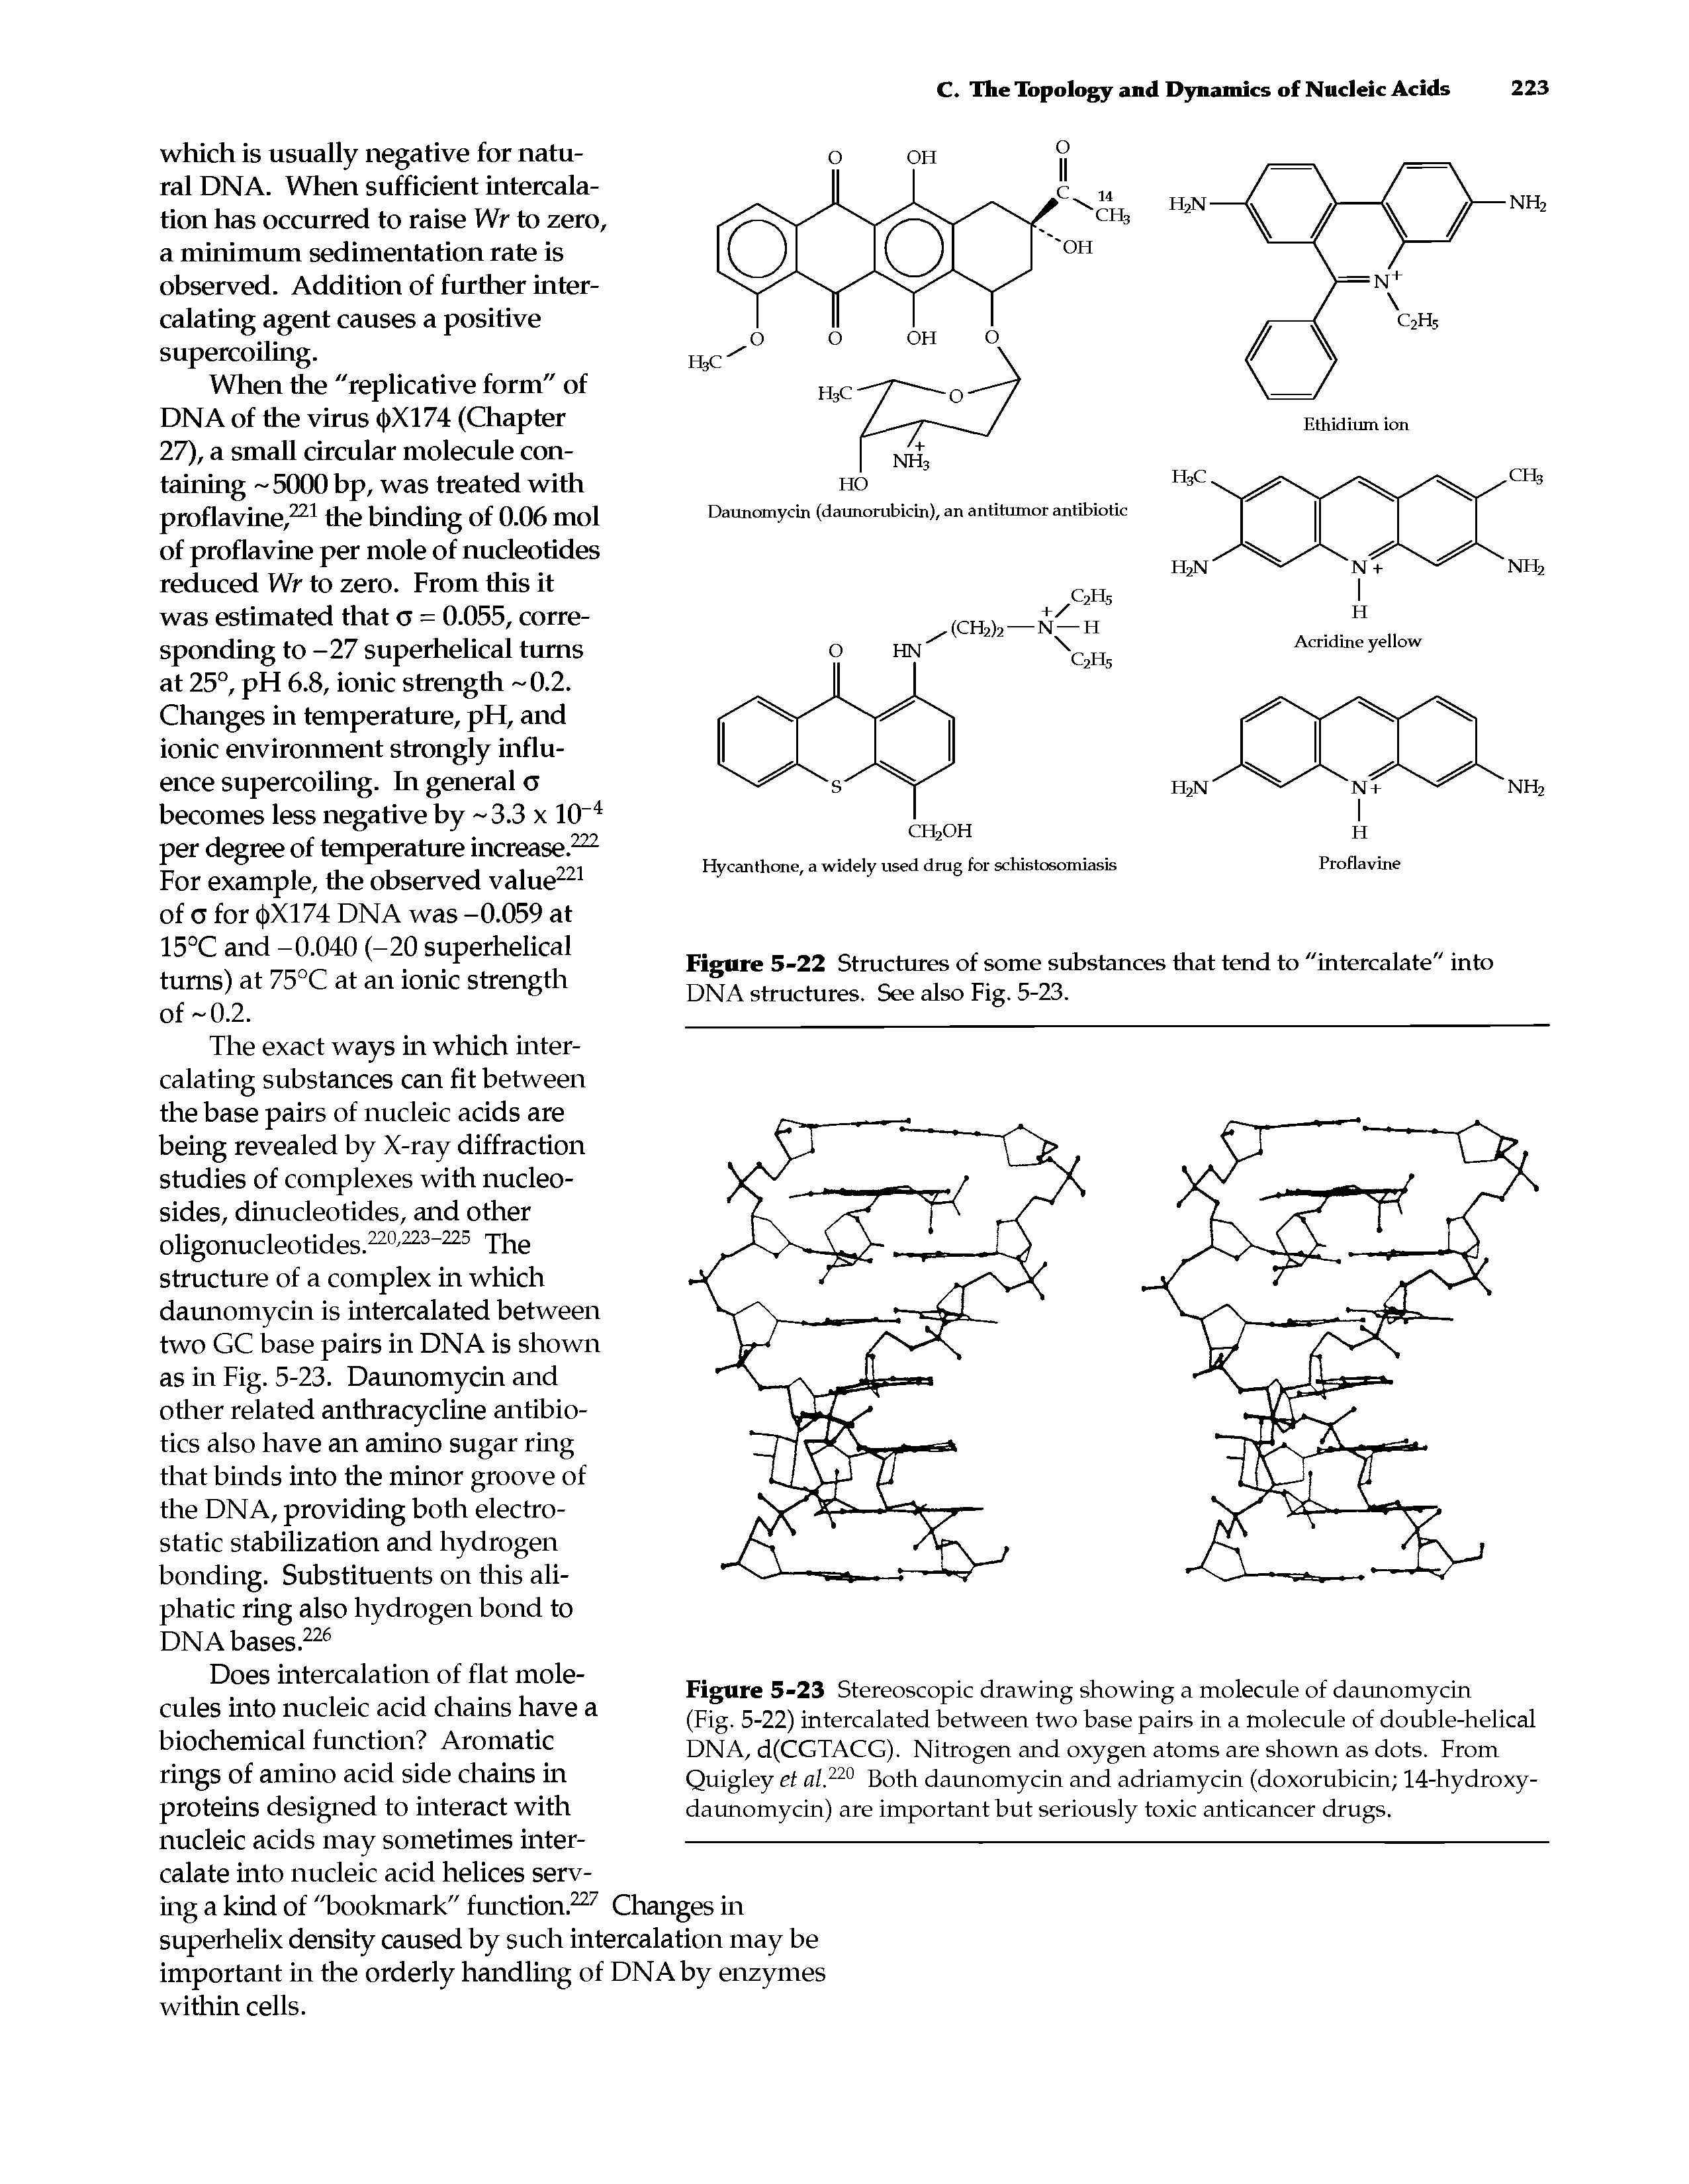 Figure 5-23 Stereoscopic drawing showing a molecule of daunomycin (Fig. 5-22) intercalated between two base pairs in a molecule of double-helical DNA, d(CGTACG). Nitrogen and oxygen atoms are shown as dots. From Quigley et al.220 Both daunomycin and adriamycin (doxorubicin 14-hydroxy-daunomycin) are important but seriously toxic anticancer drugs.